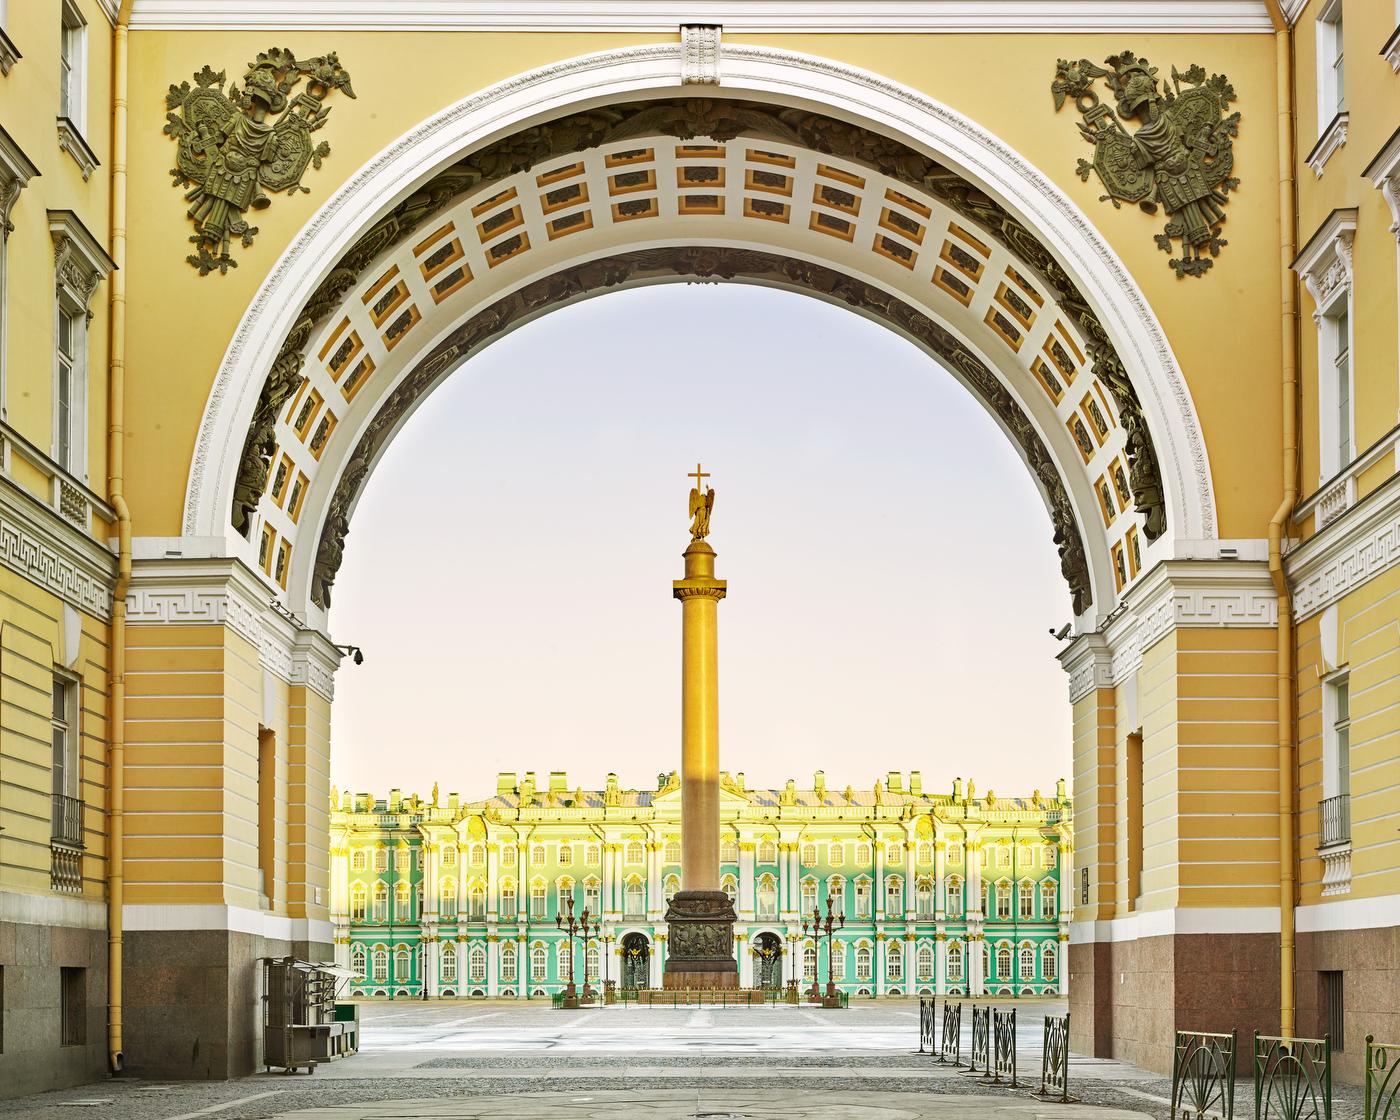 Palace Square, St Petersburg, Russia (59” x 73.5”)